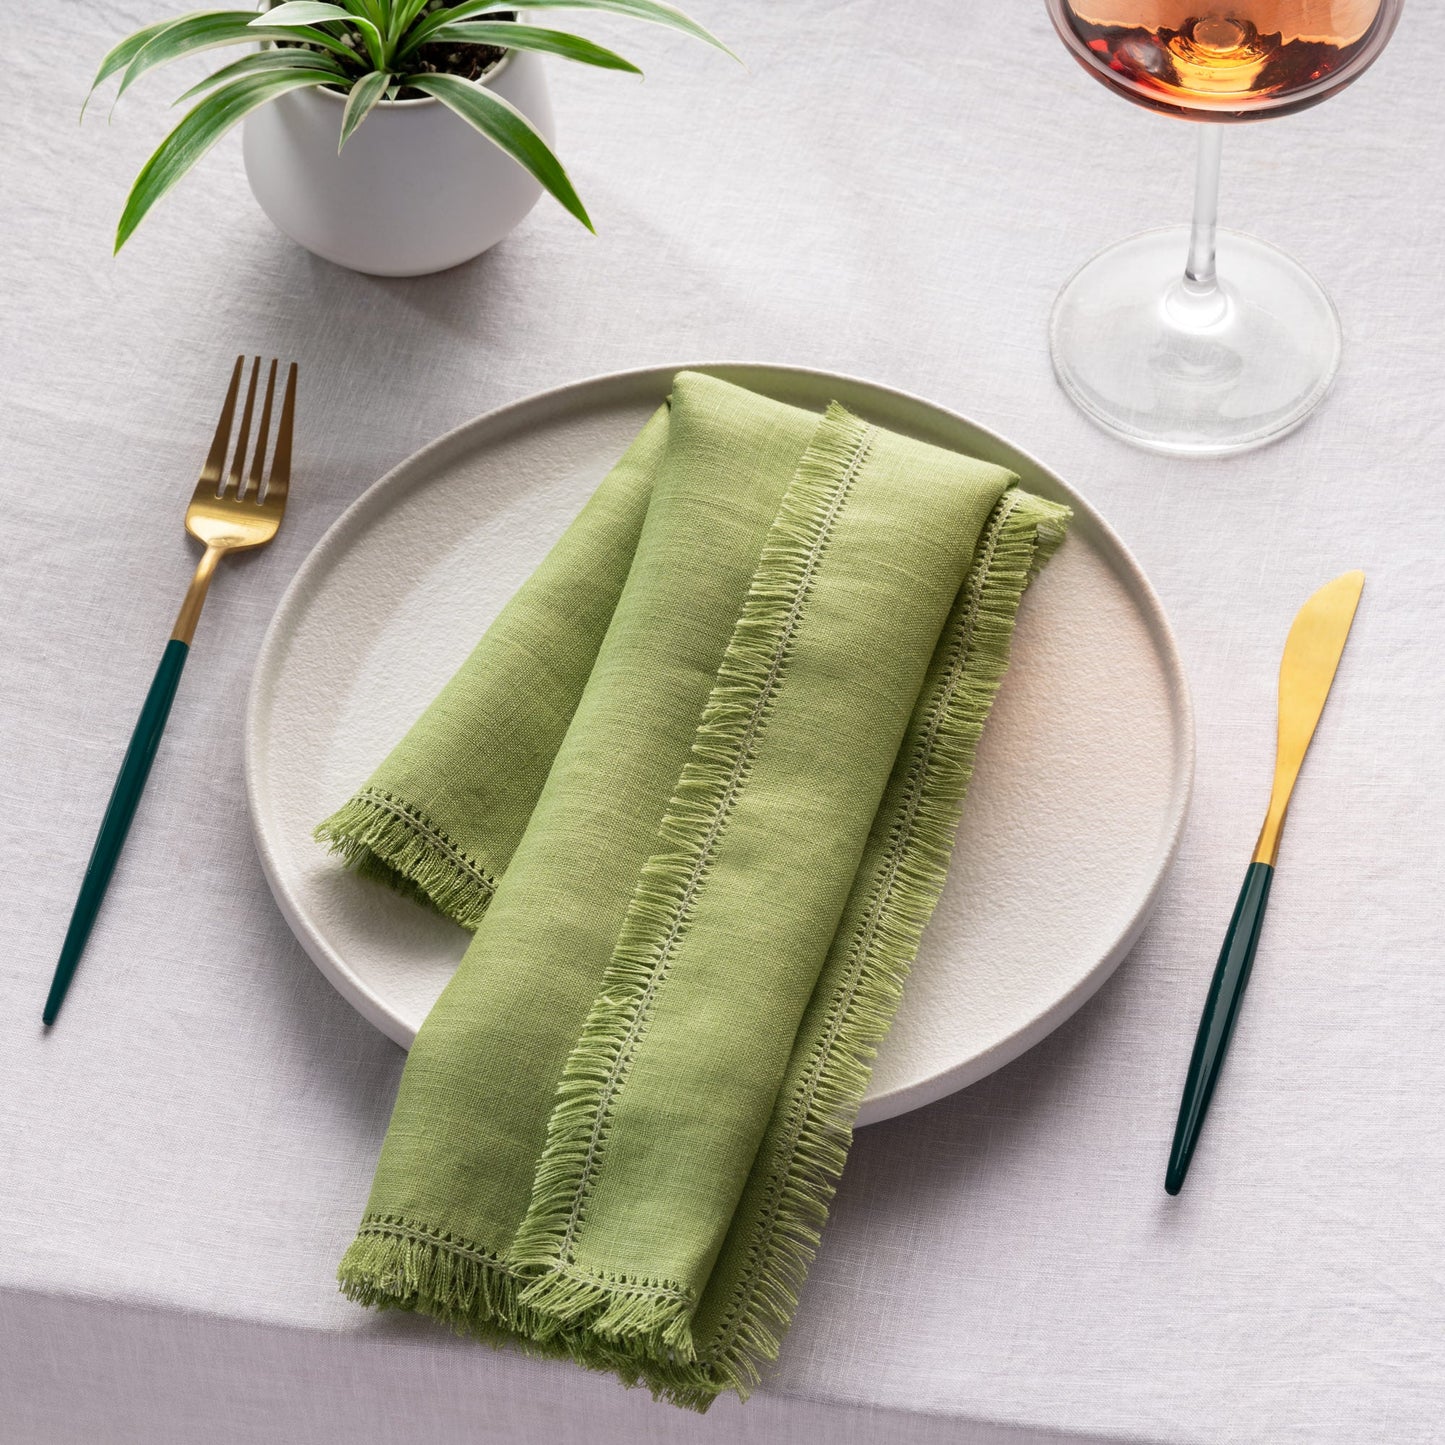 Lintex Walden Green Holiday 14x70 Table Runner with Matching 8 Piece  Napkin Se